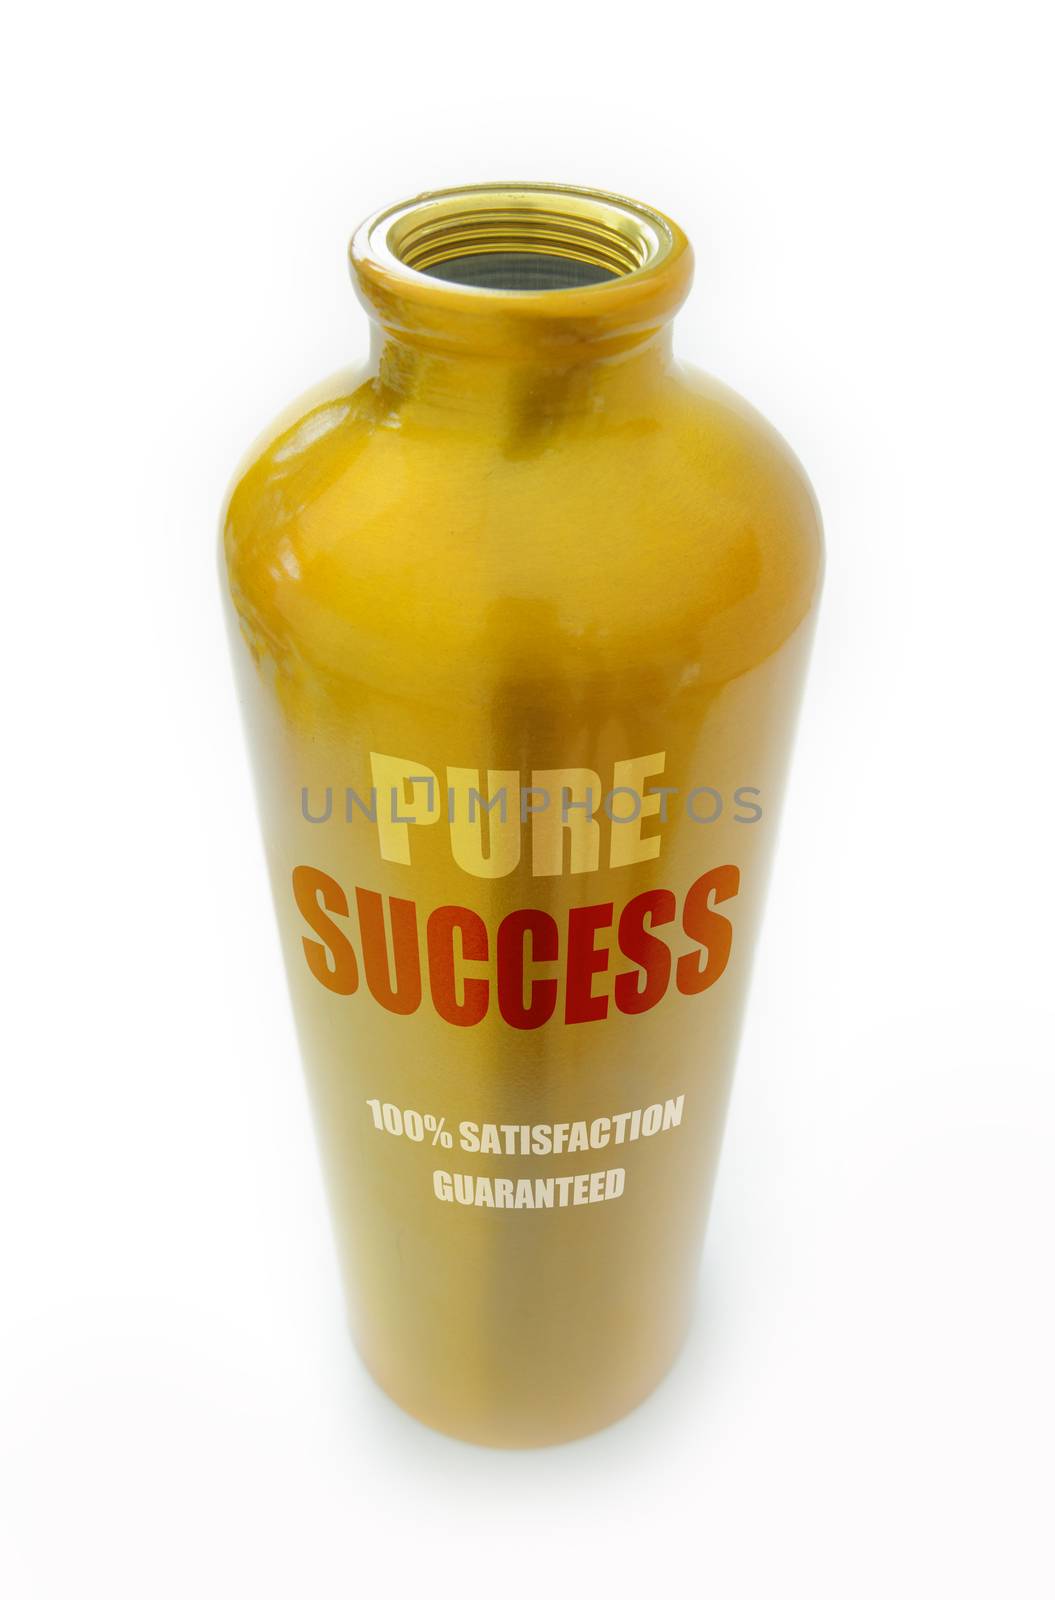 Success 'bottled' in a gold container, as a metaphor for wealth, achievement and motivation